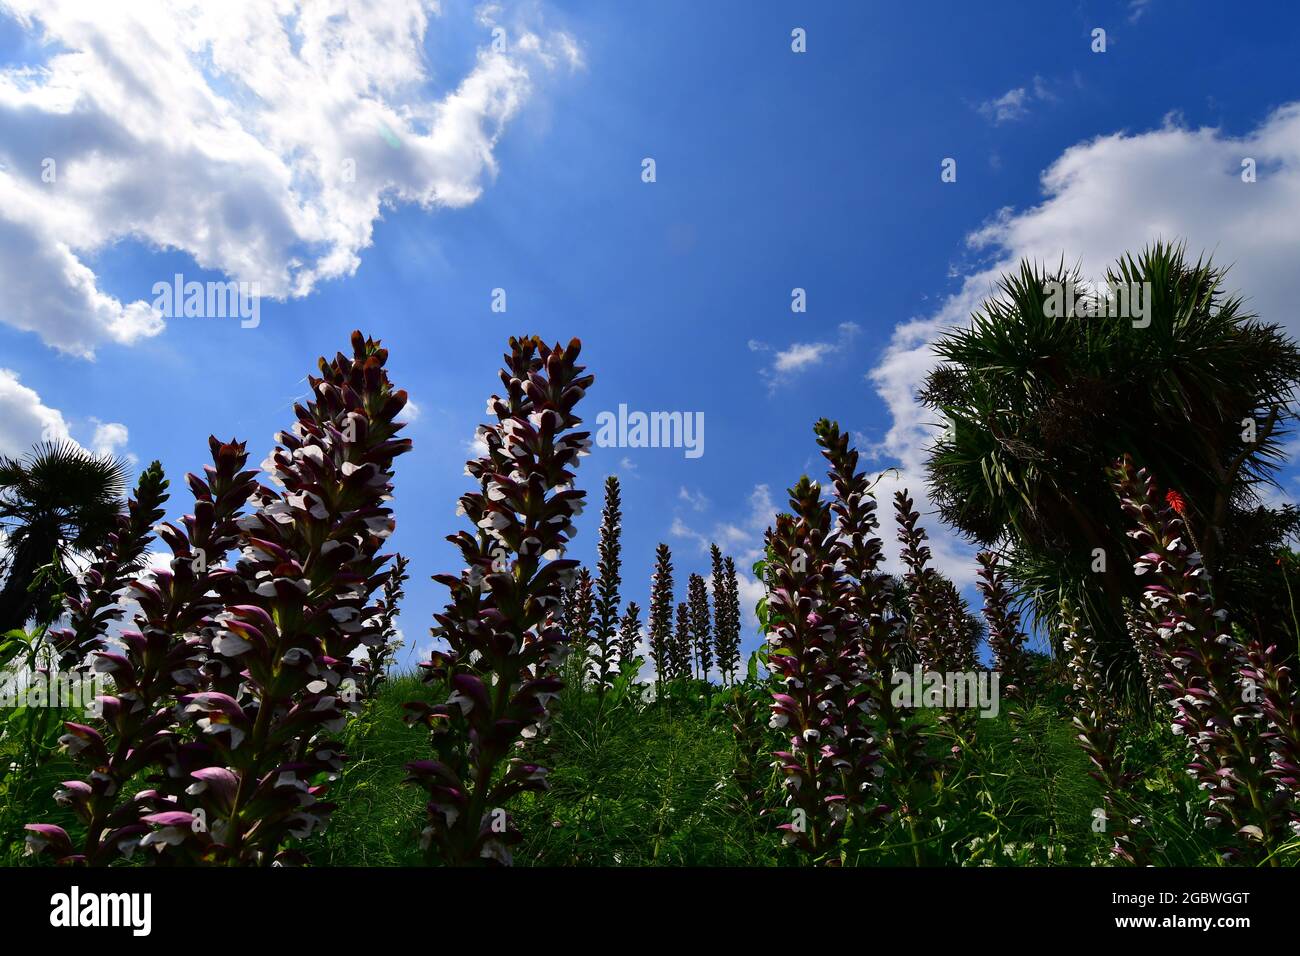 UK Lyme Regis on a dry and warm summers day pointing upwards to the blue sky with white fluffy clouds are seen a plant called Acanthus Mollis. Stock Photo